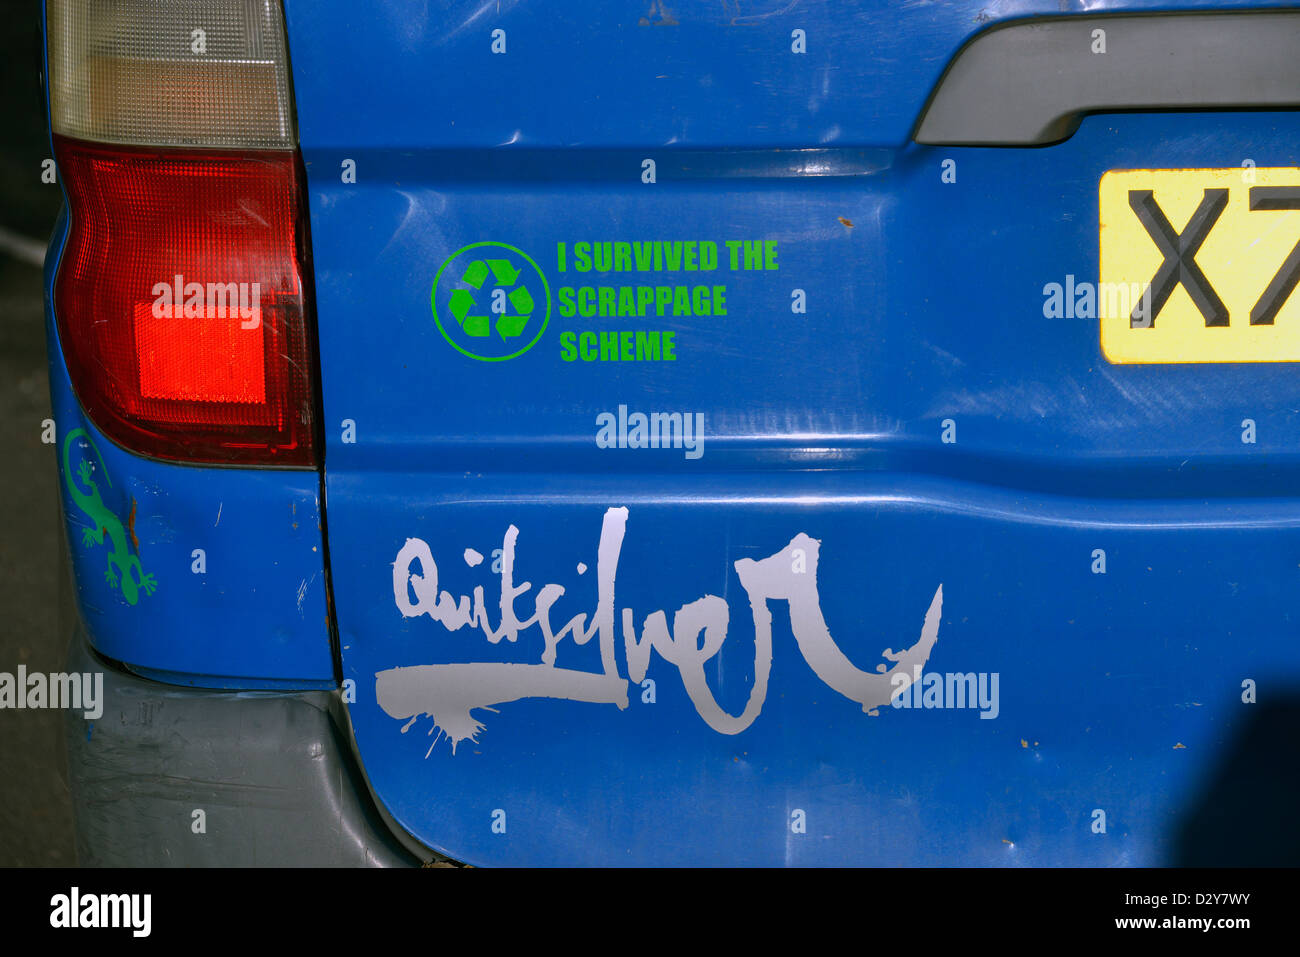 'I SURVIVED THE SCRAPPAGE SCHEME', slogan painted on old Toyota Hiace. Stock Photo